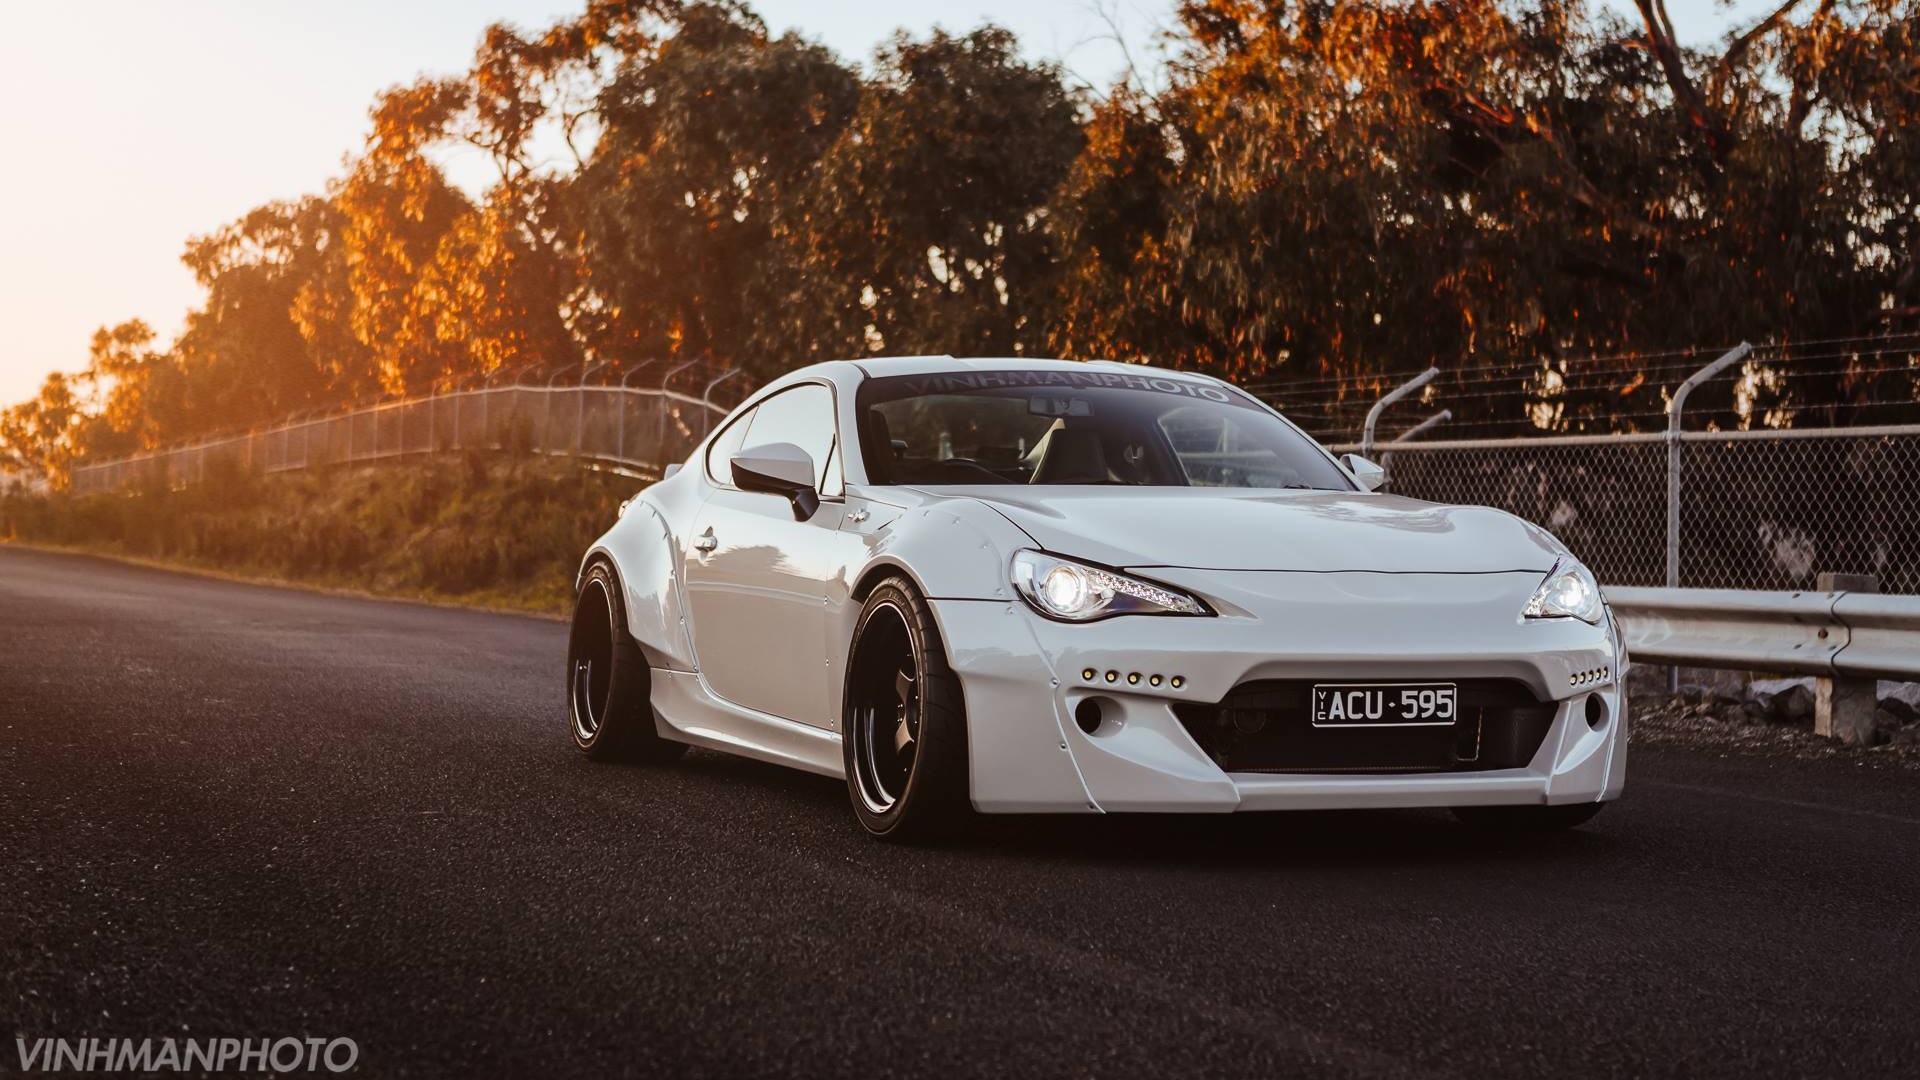 Toyota GT 86 JDM Japanese Cars Toyota Tuning Car Road Trees White Cars Rocket Bunny Vehicle Front An 1920x1080